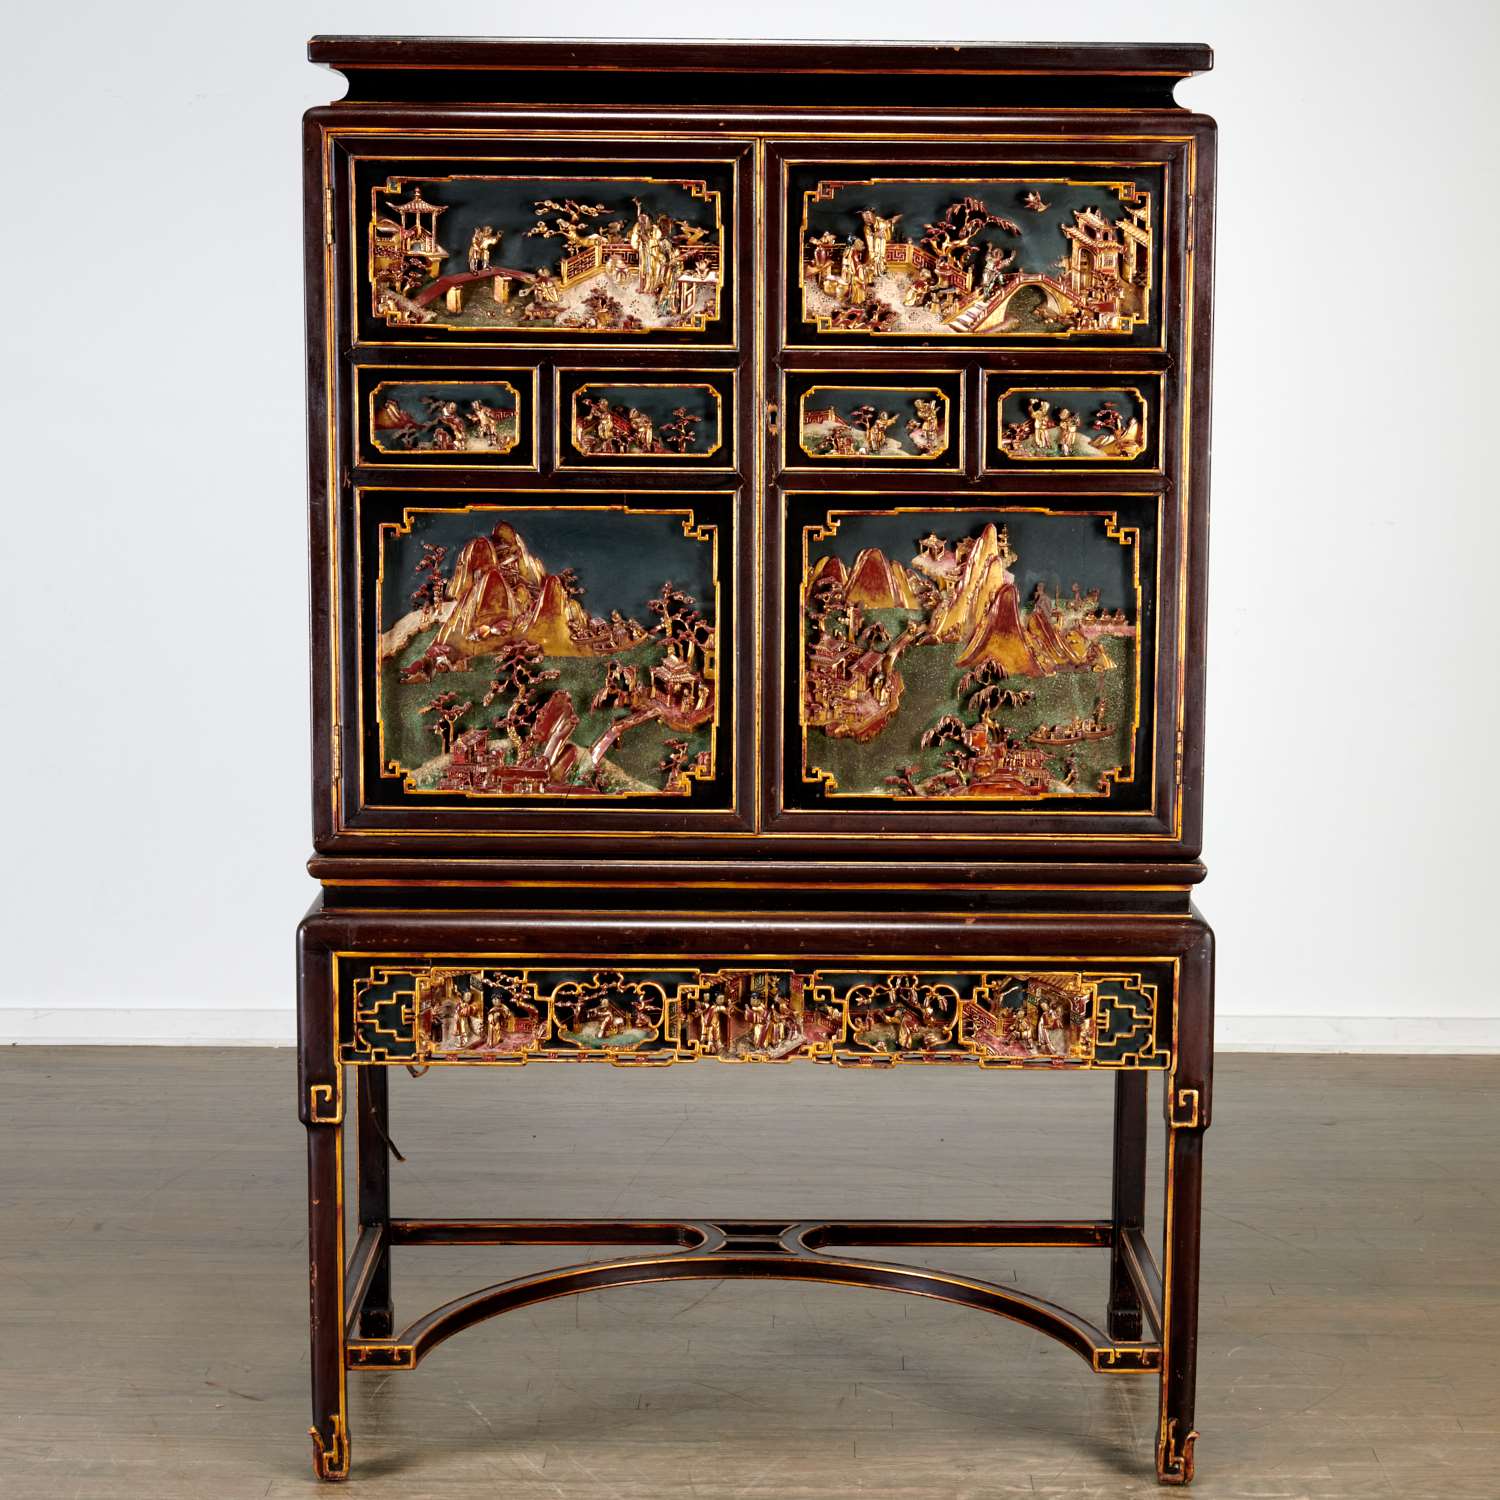 CHINESE EXPORT CARVED LACQUERED CABINET